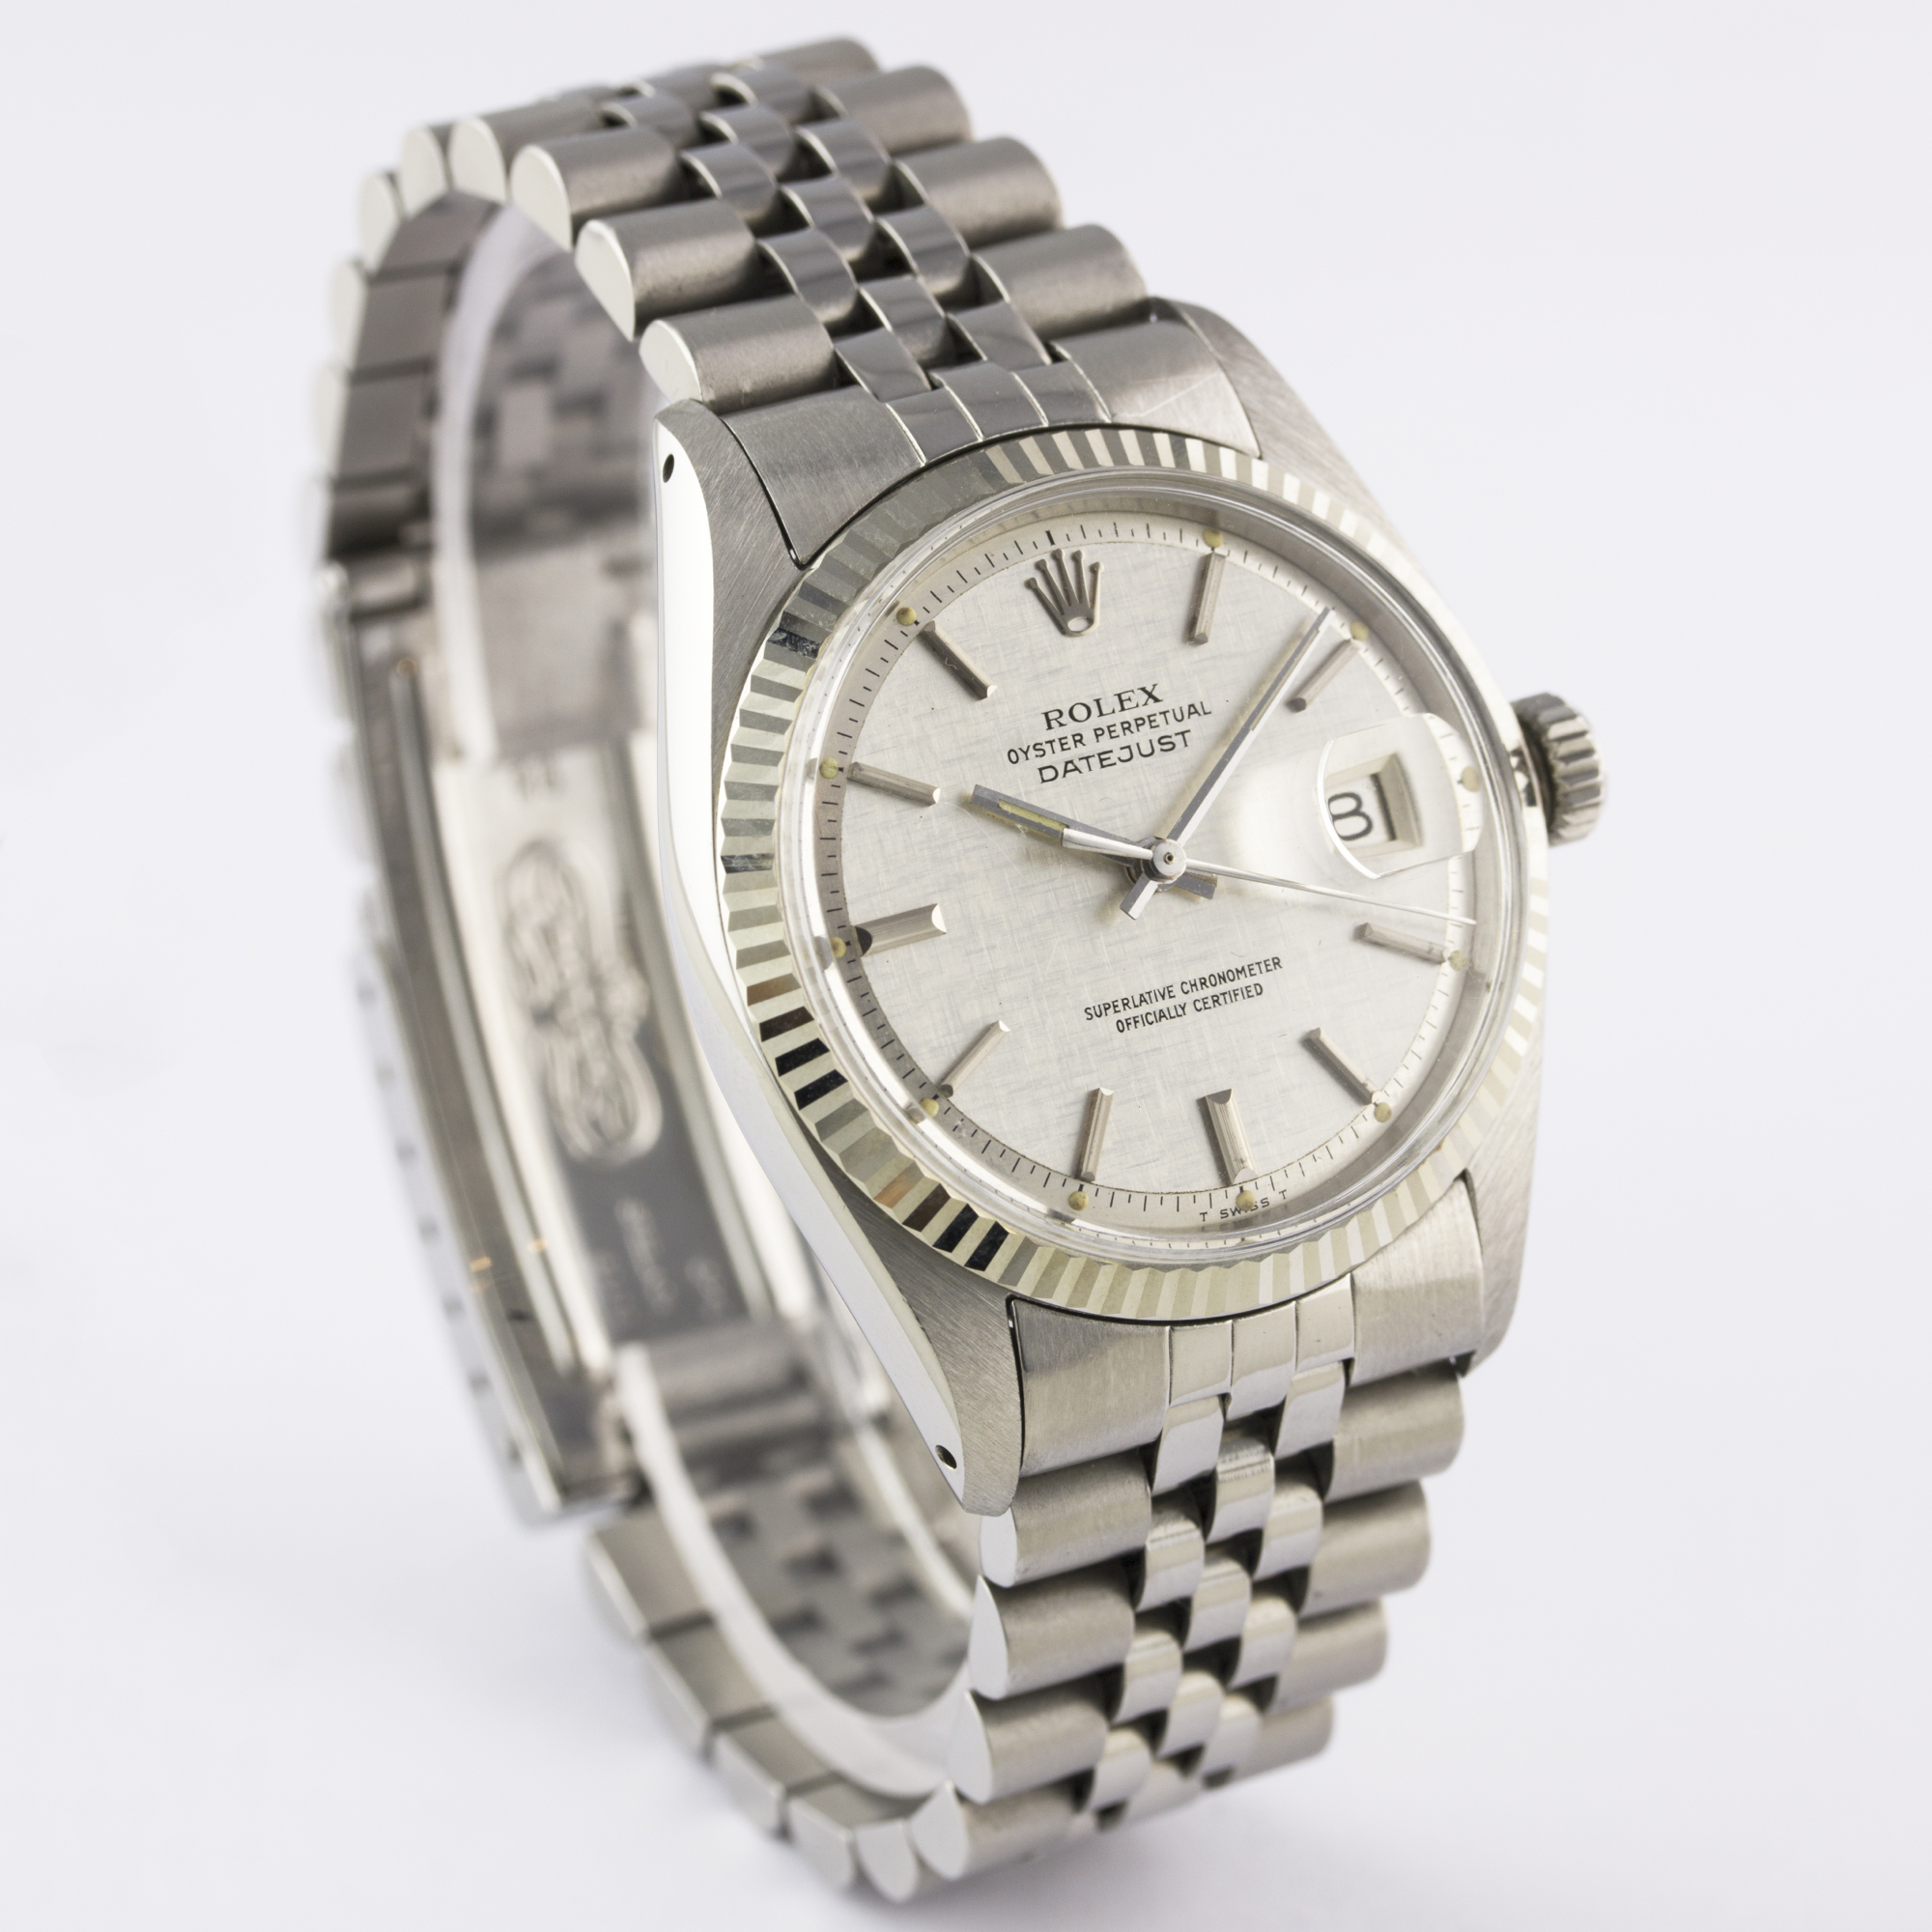 A GENTLEMAN'S STEEL & WHITE GOLD ROLEX OYSTER PERPETUAL DATEJUST BRACELET WATCH CIRCA 1977, REF. - Image 5 of 9